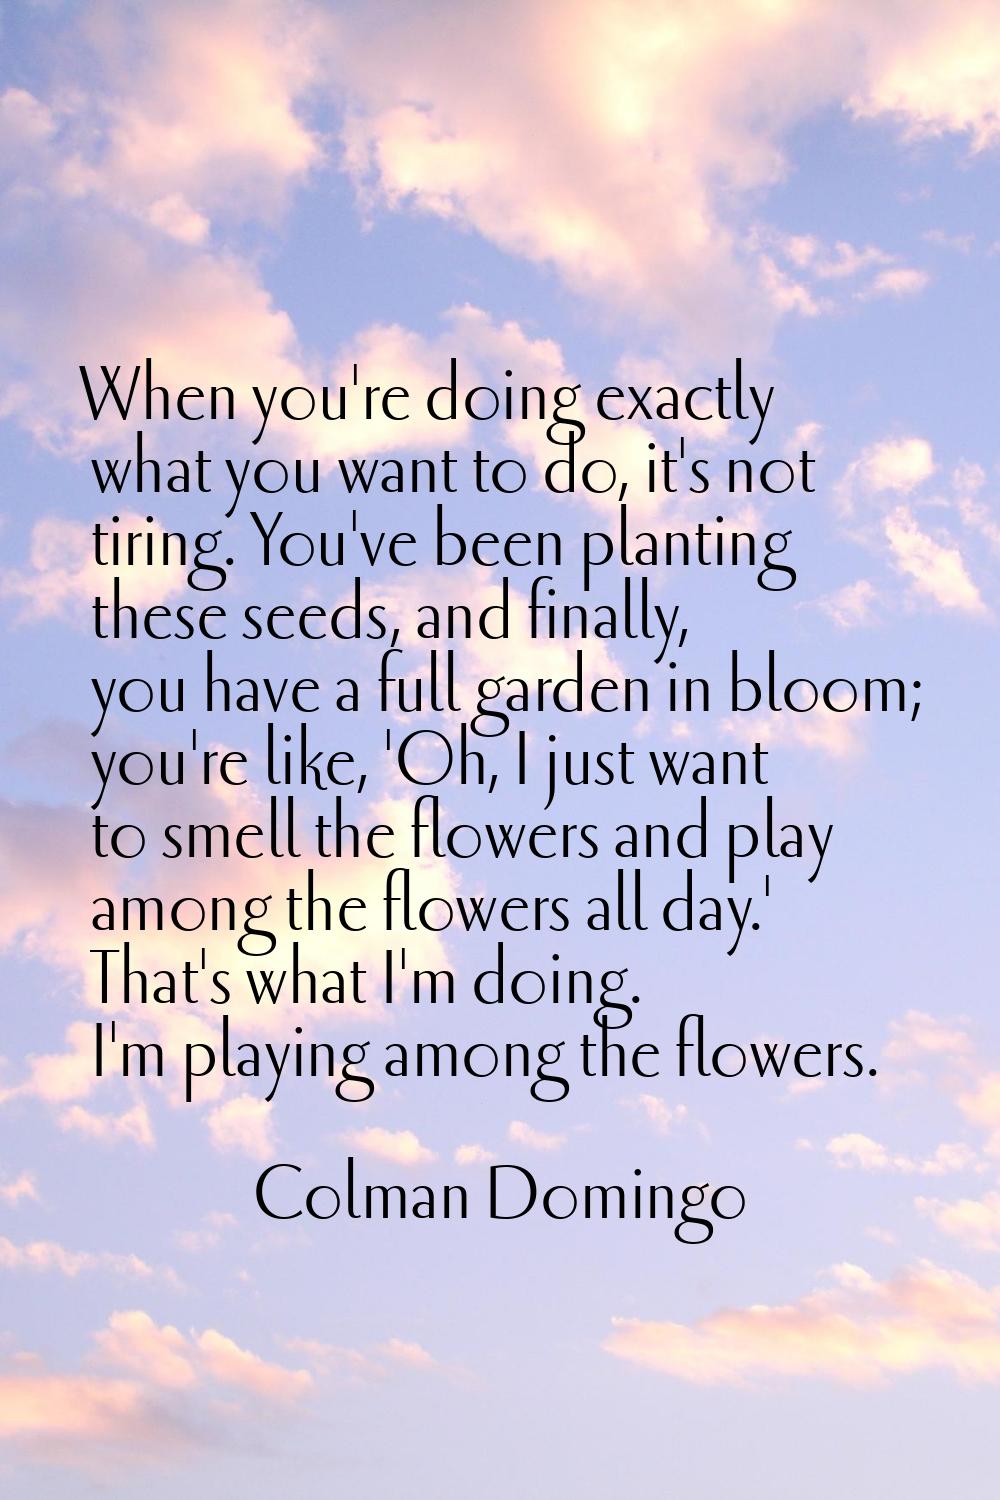 When you're doing exactly what you want to do, it's not tiring. You've been planting these seeds, a